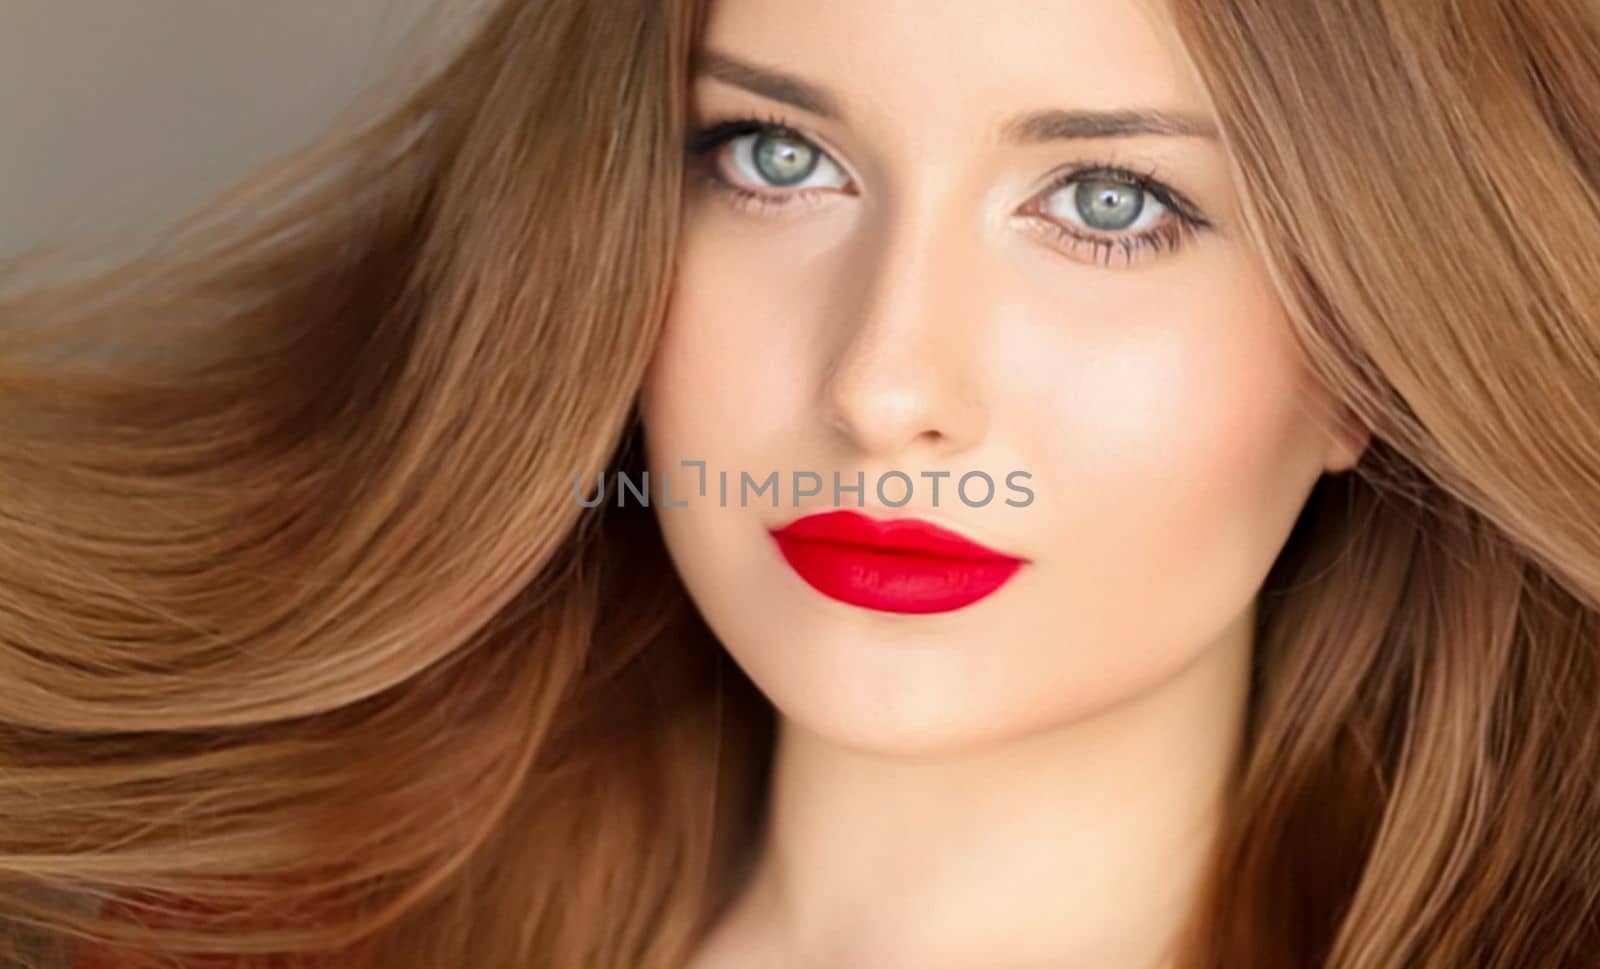 Hairstyle, beauty and hair care, beautiful woman with long healthy hair, model wearing matte red lipstick makeup, glamour portrait for hair salon and haircare.